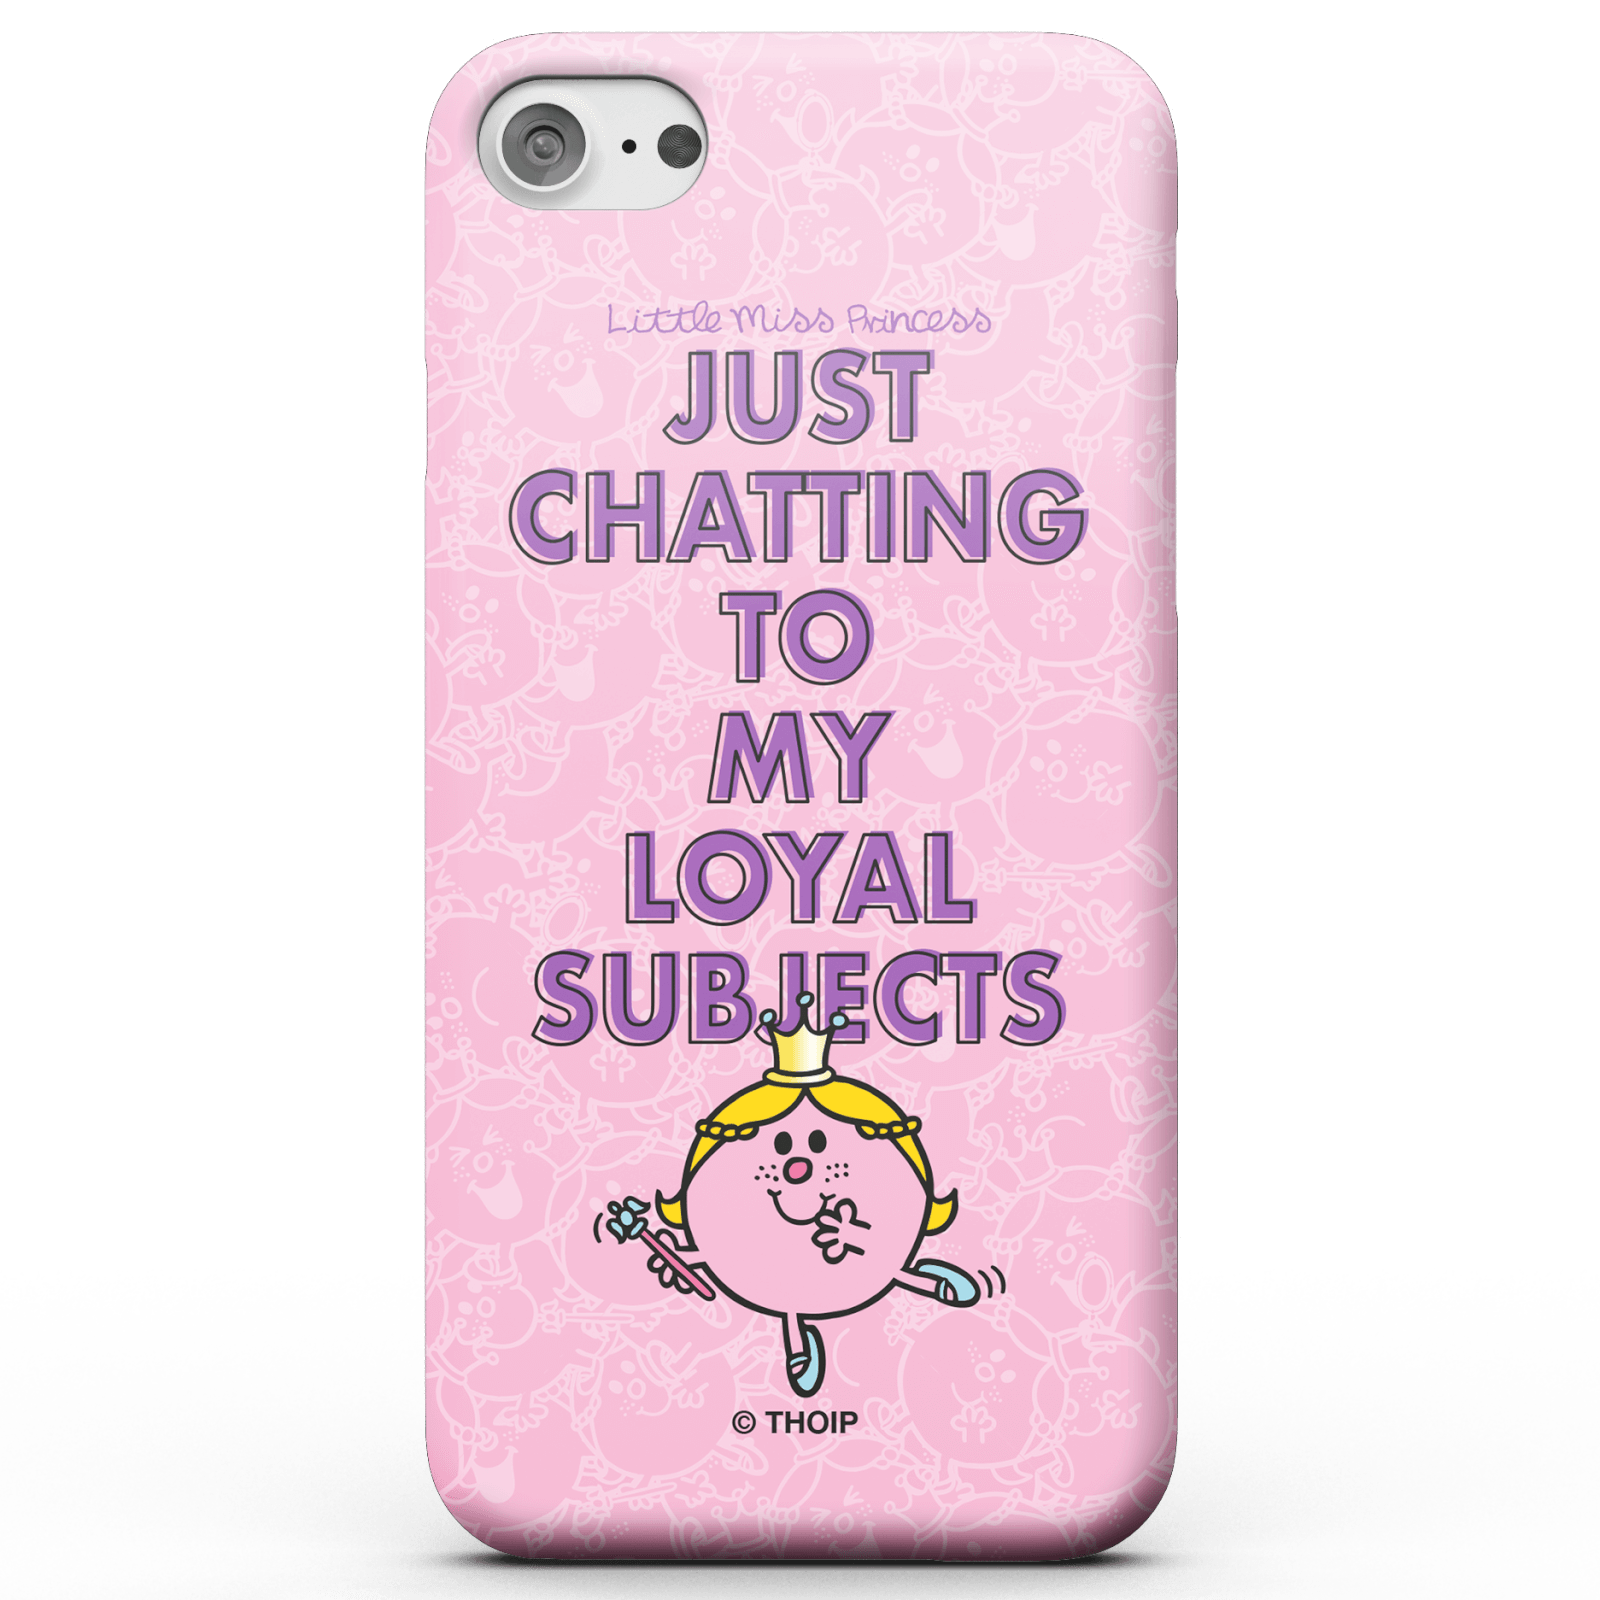 Mr Men & Little Miss Little Miss Princess Just Chatting To My Loyal Subjects Phone Case for iPhone and Android - iPhone 5/5s - Snap Case - Matte